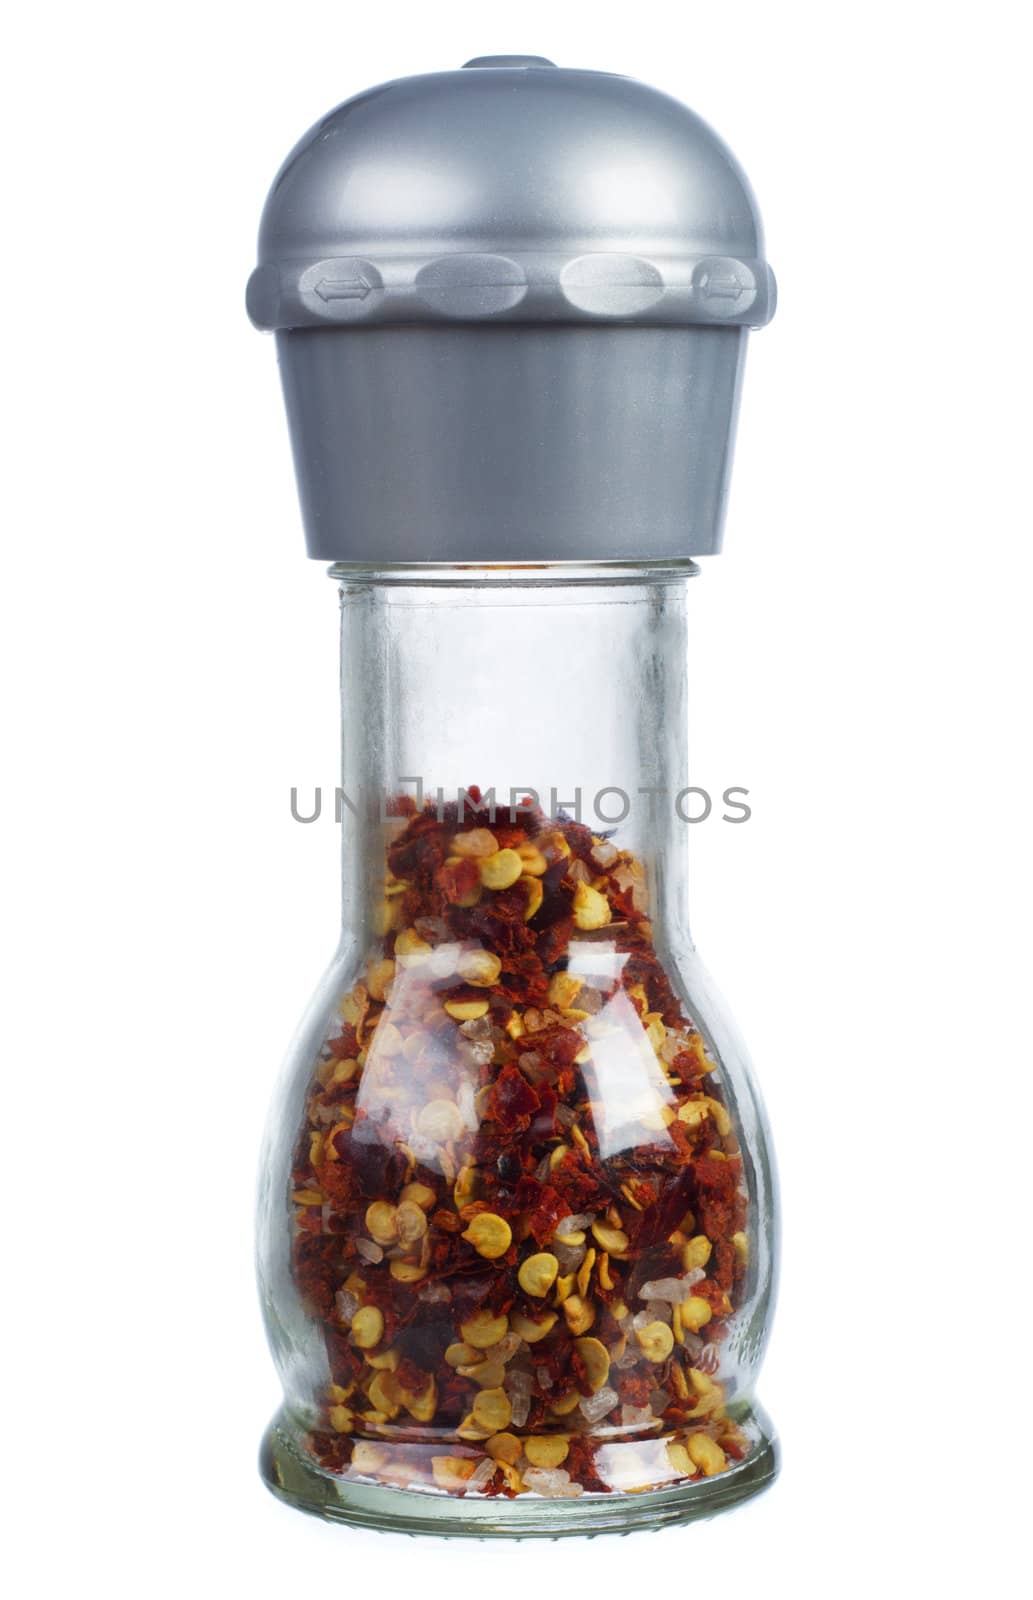 Red chili pepper in a glass container, isolated on white background